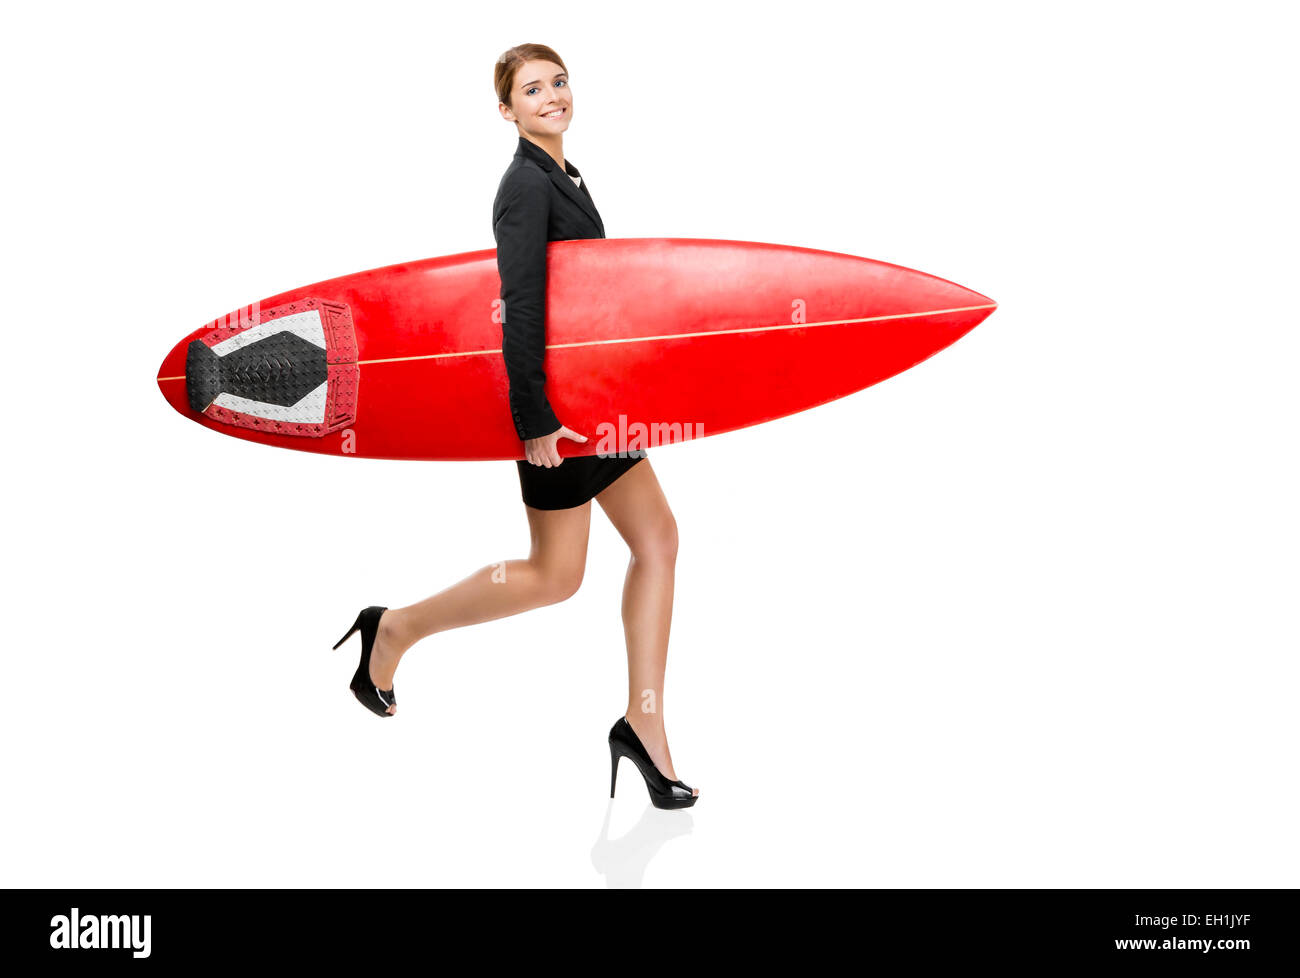 Business woman holding a surfboard, isolated on white background Stock Photo